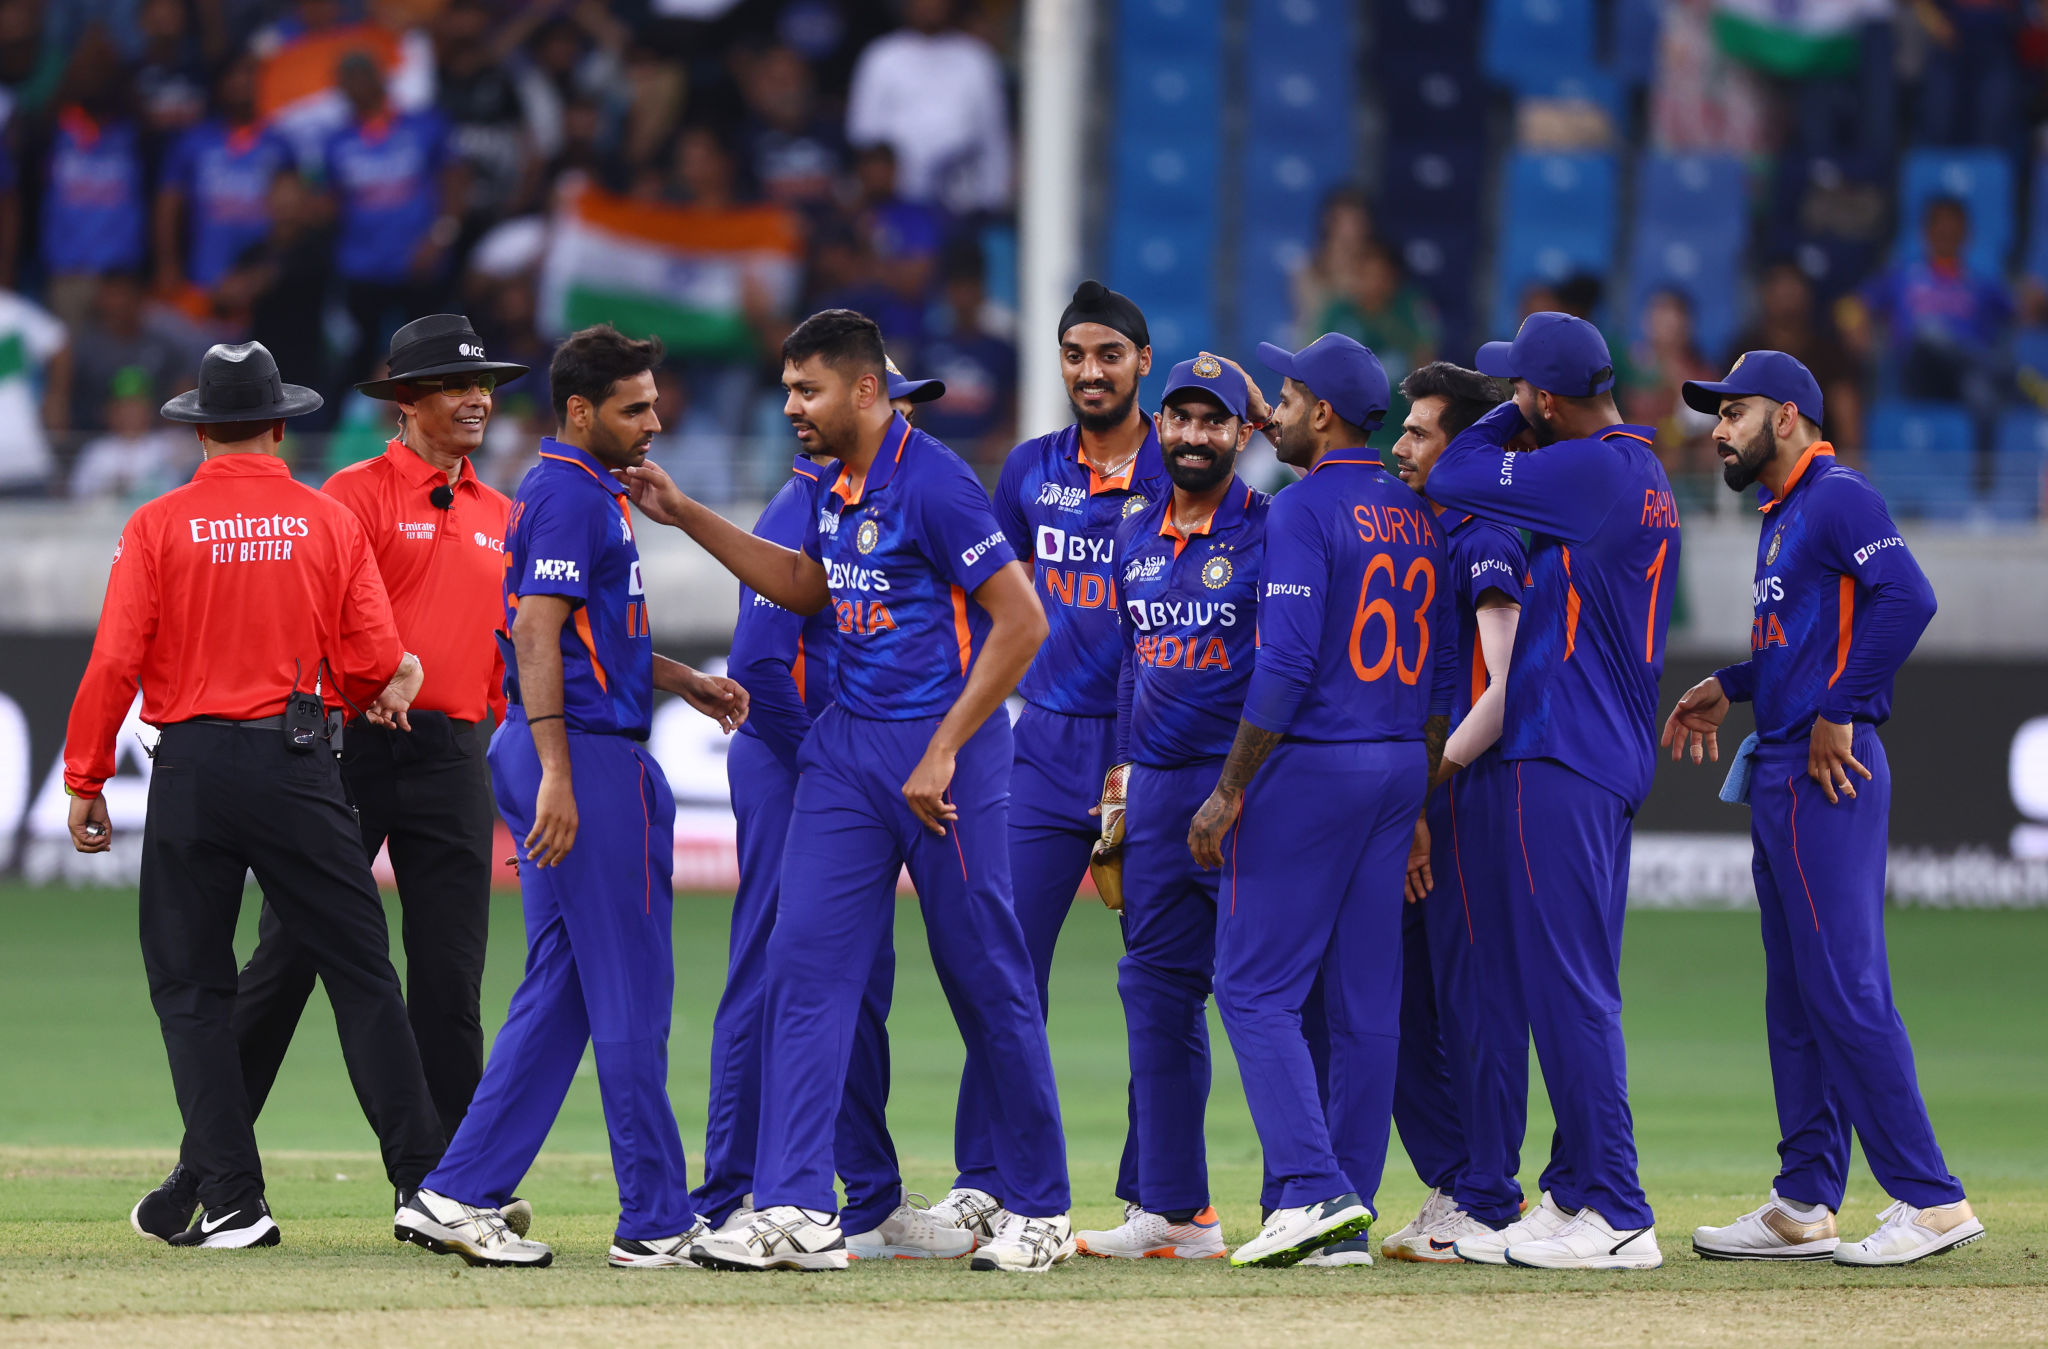 IND vs HKG LIVE: All you want to know about India vs HongKong, Group A, Asia Cup 2022 Fixture: Follow IND vs HKG Asia Cup LIVE Updates 